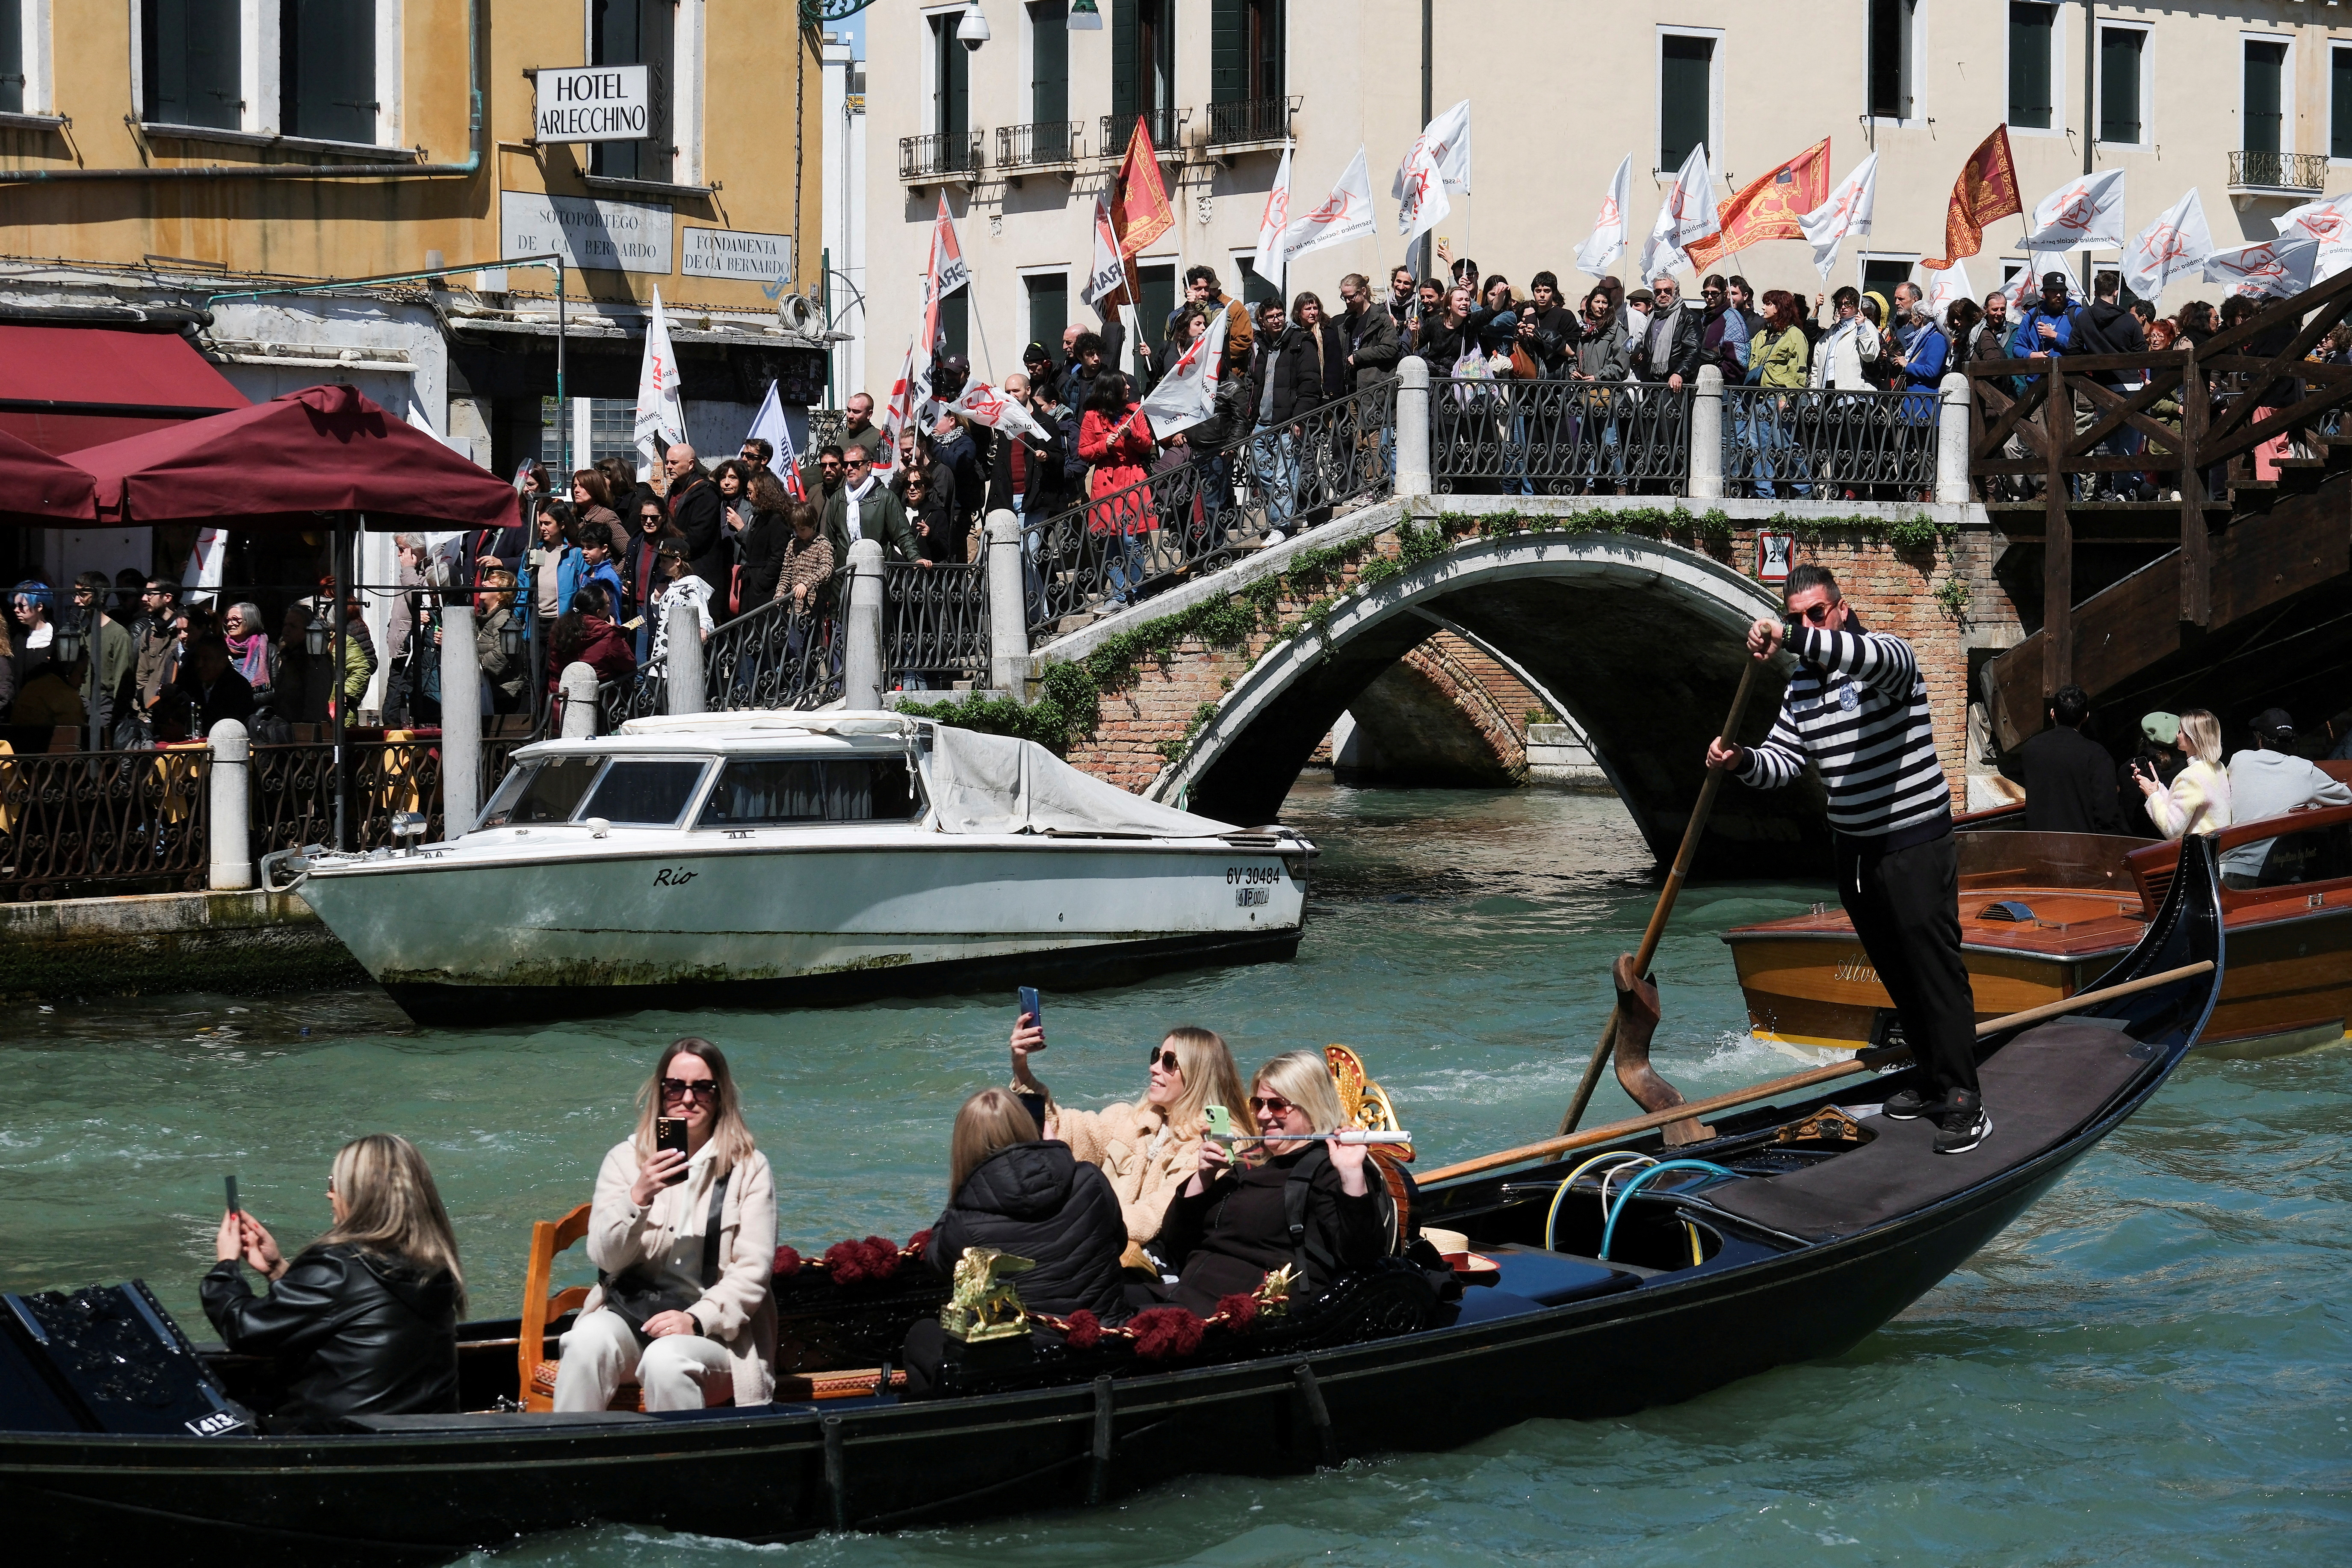 People occupied streets and canals to protest the move